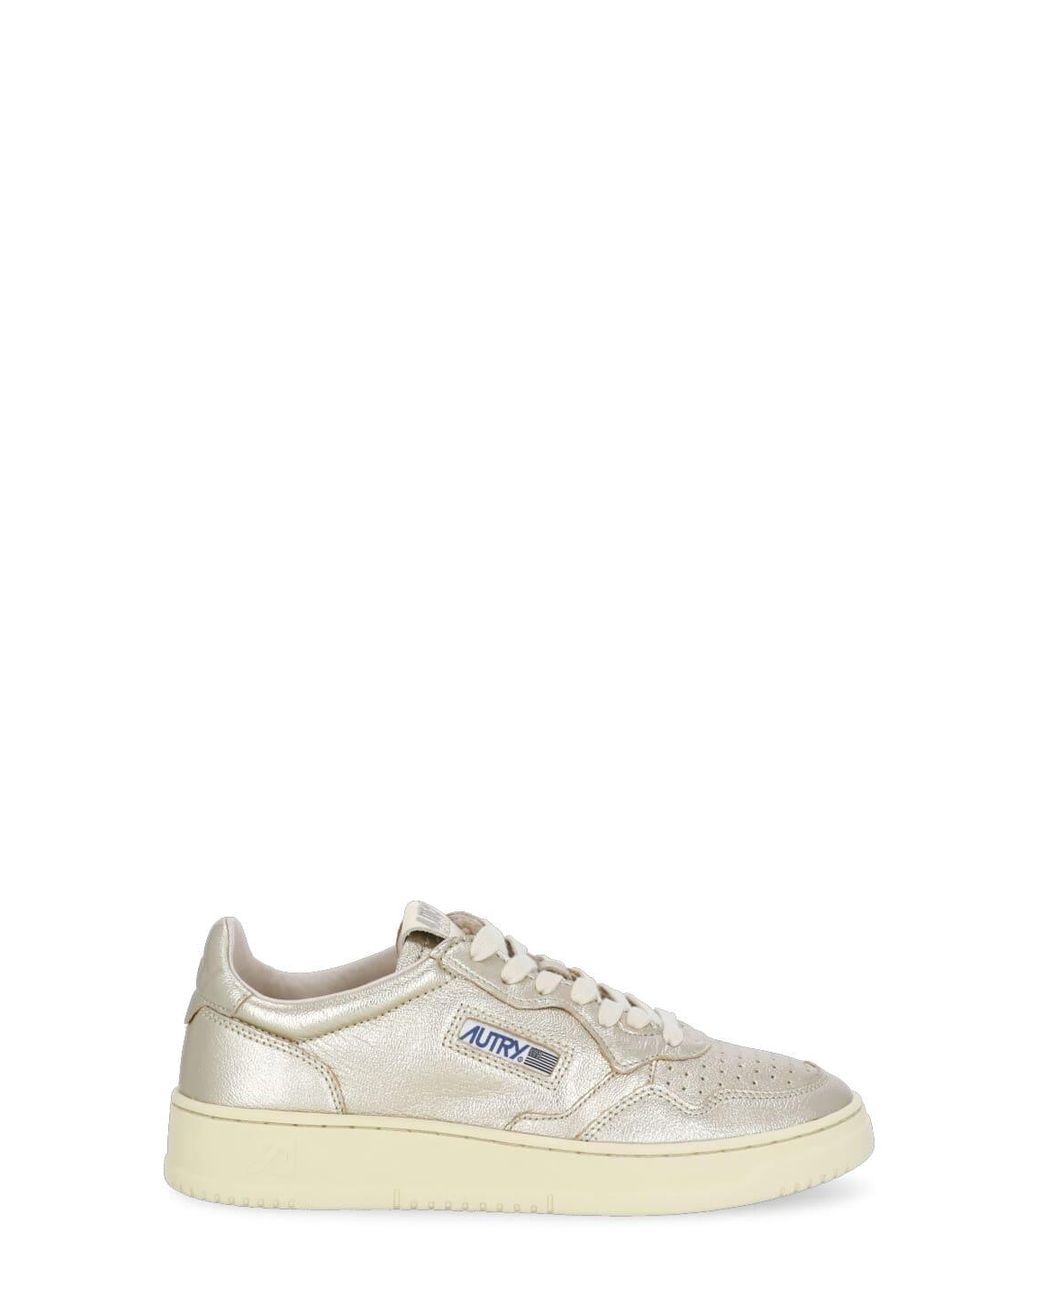 Autry Leather Medalist Low Platino Sneakers in Gold (Metallic) | Lyst UK